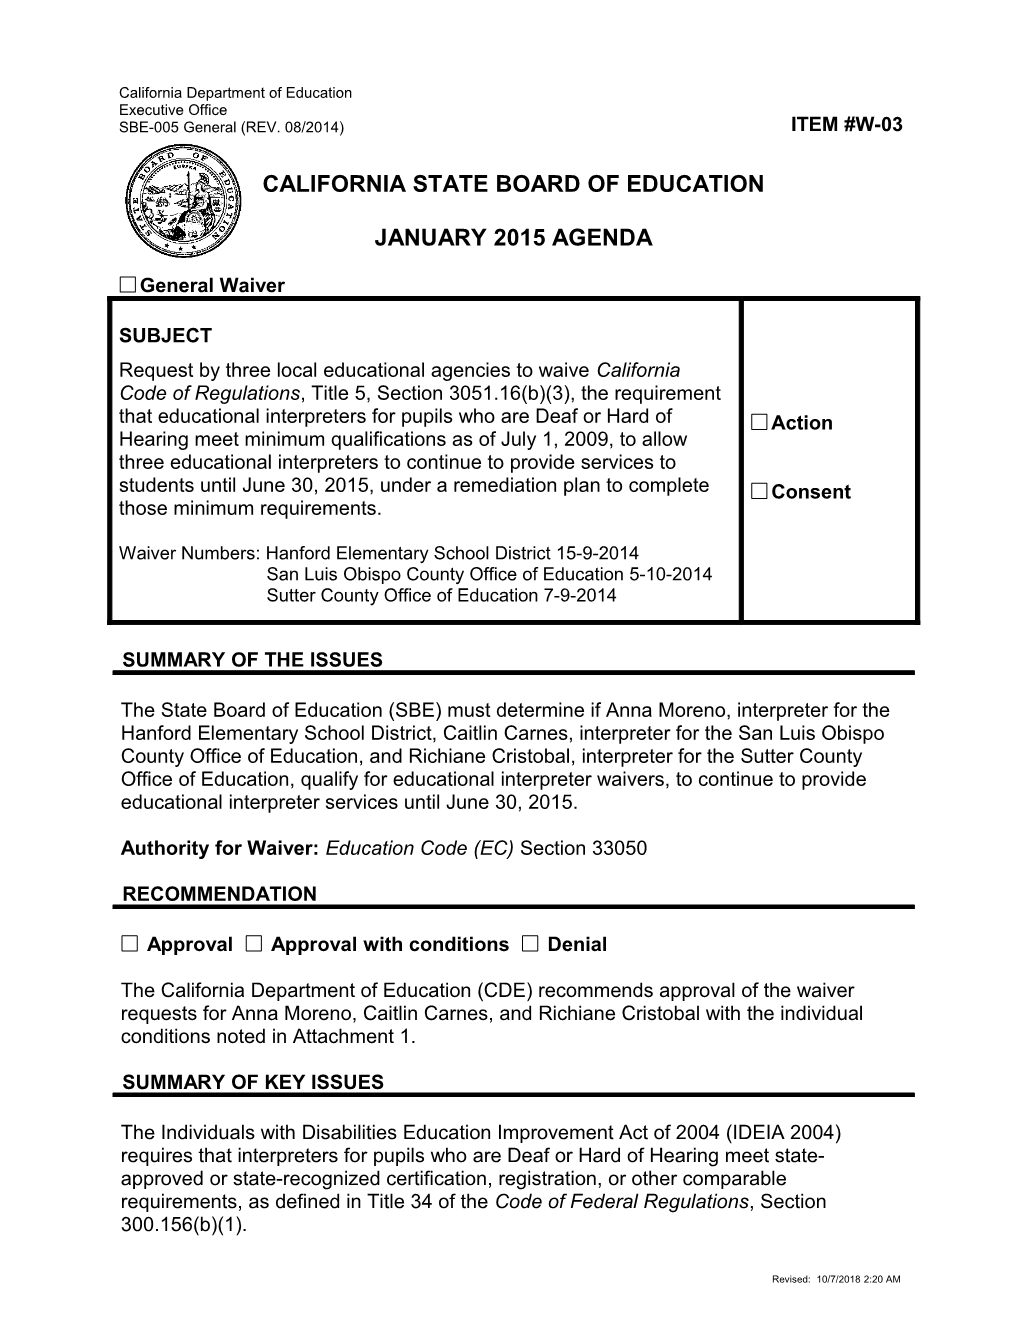 January 2015 Waiver Item W-03 - Meeting Agendas (CA State Board of Education)